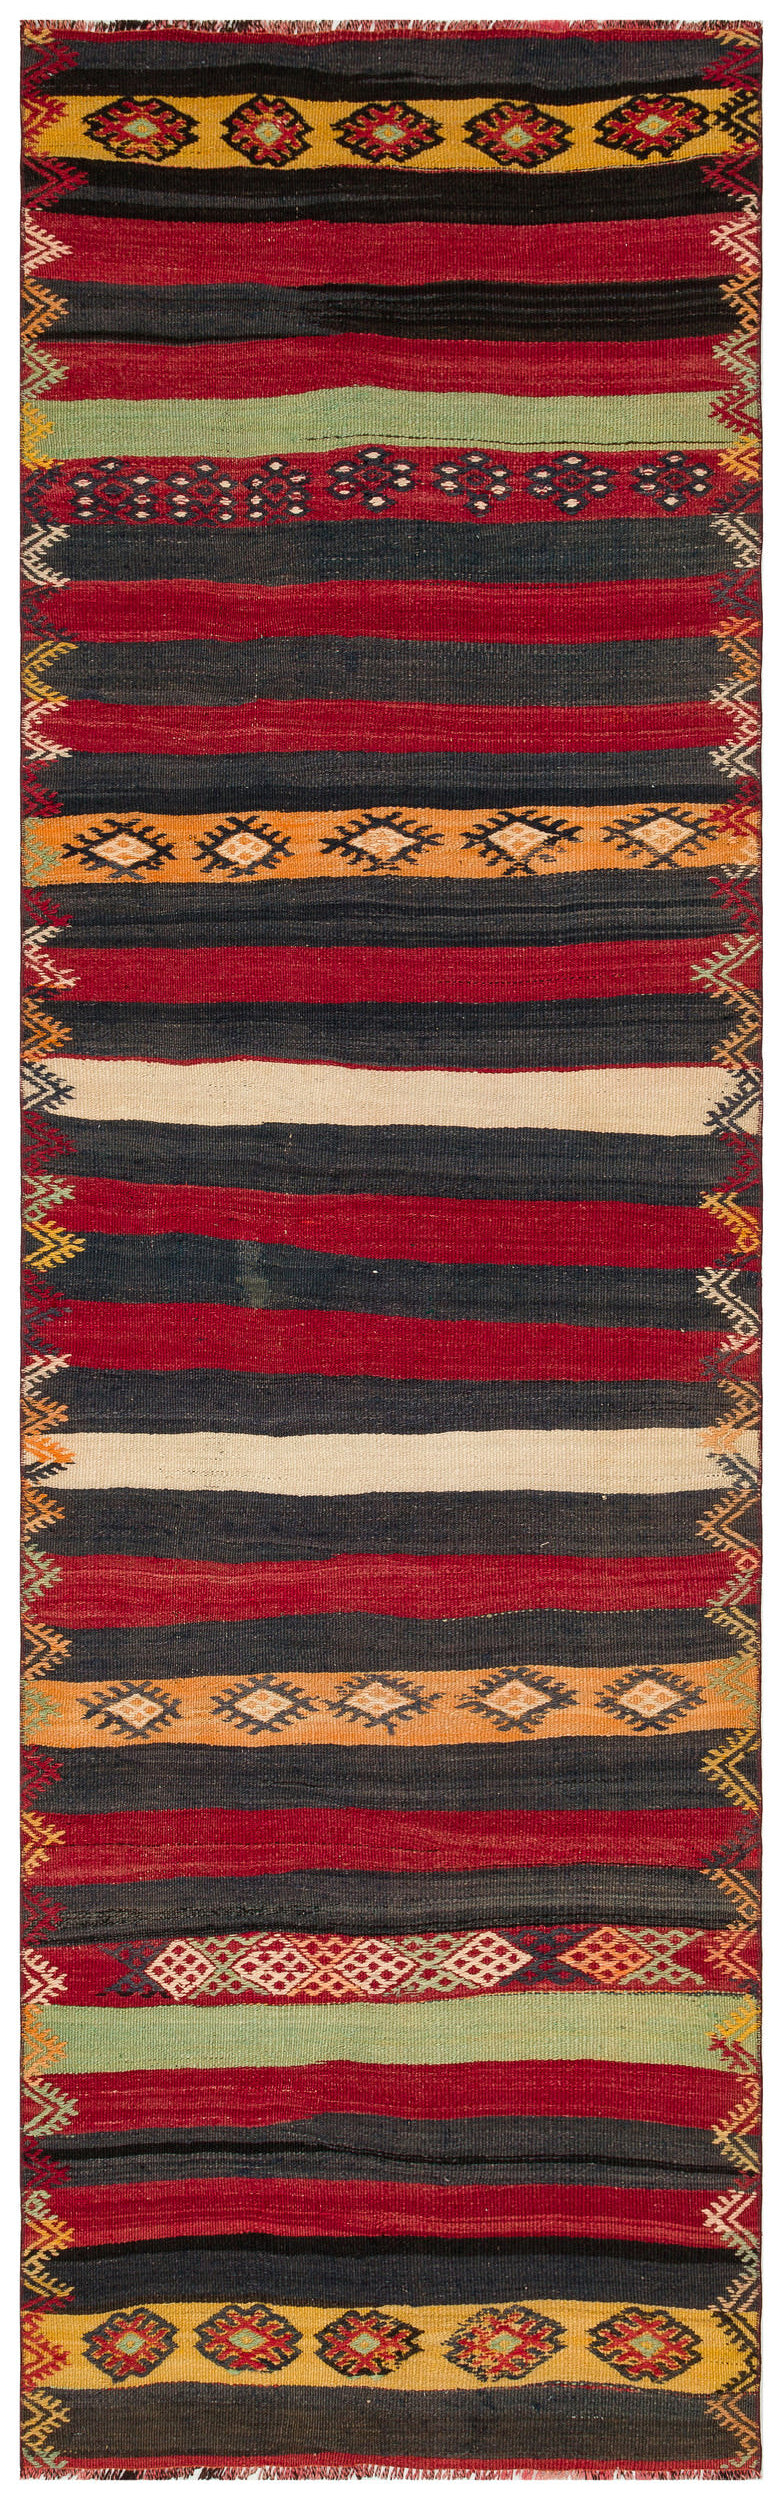 Striped Over Dyed Kilim Rug 3'1'' x 10'2'' ft 94 x 310 cm